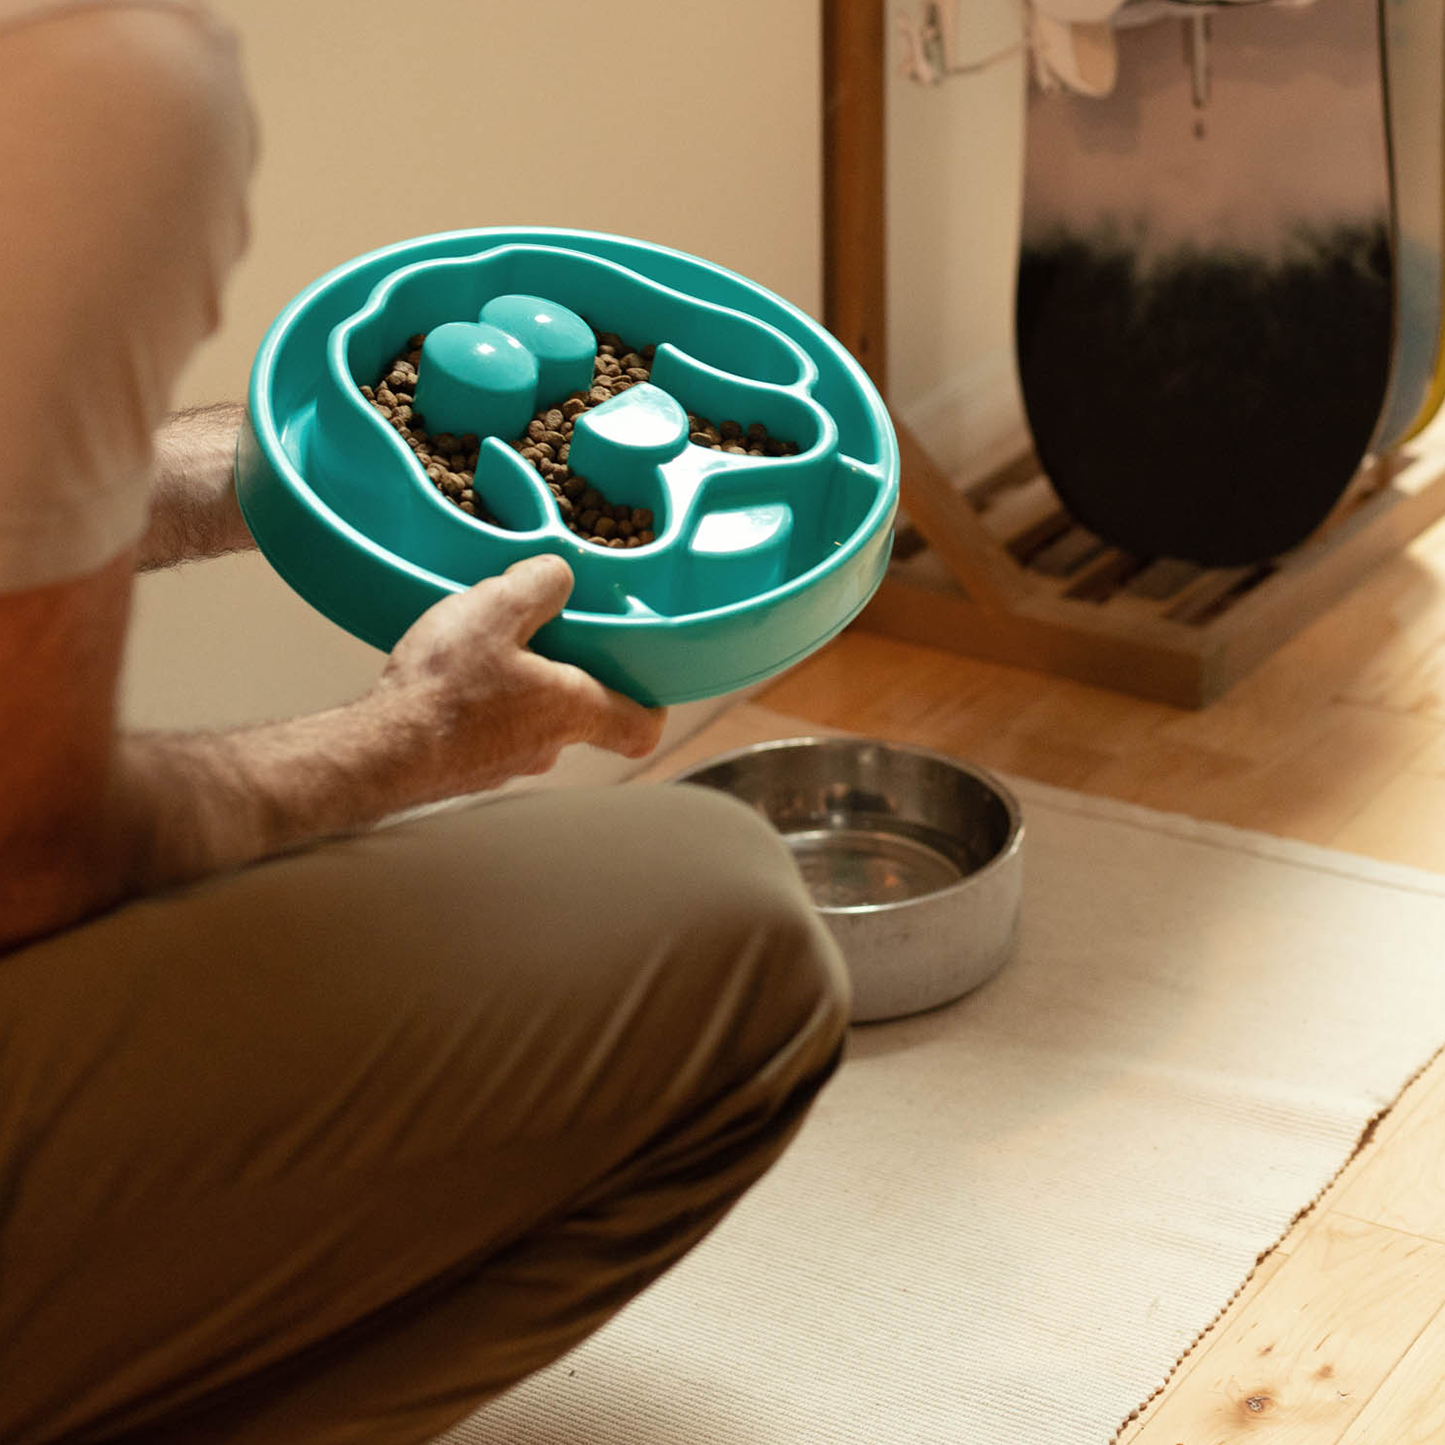 Interactive slow feeder bowl for dog, intermediate level